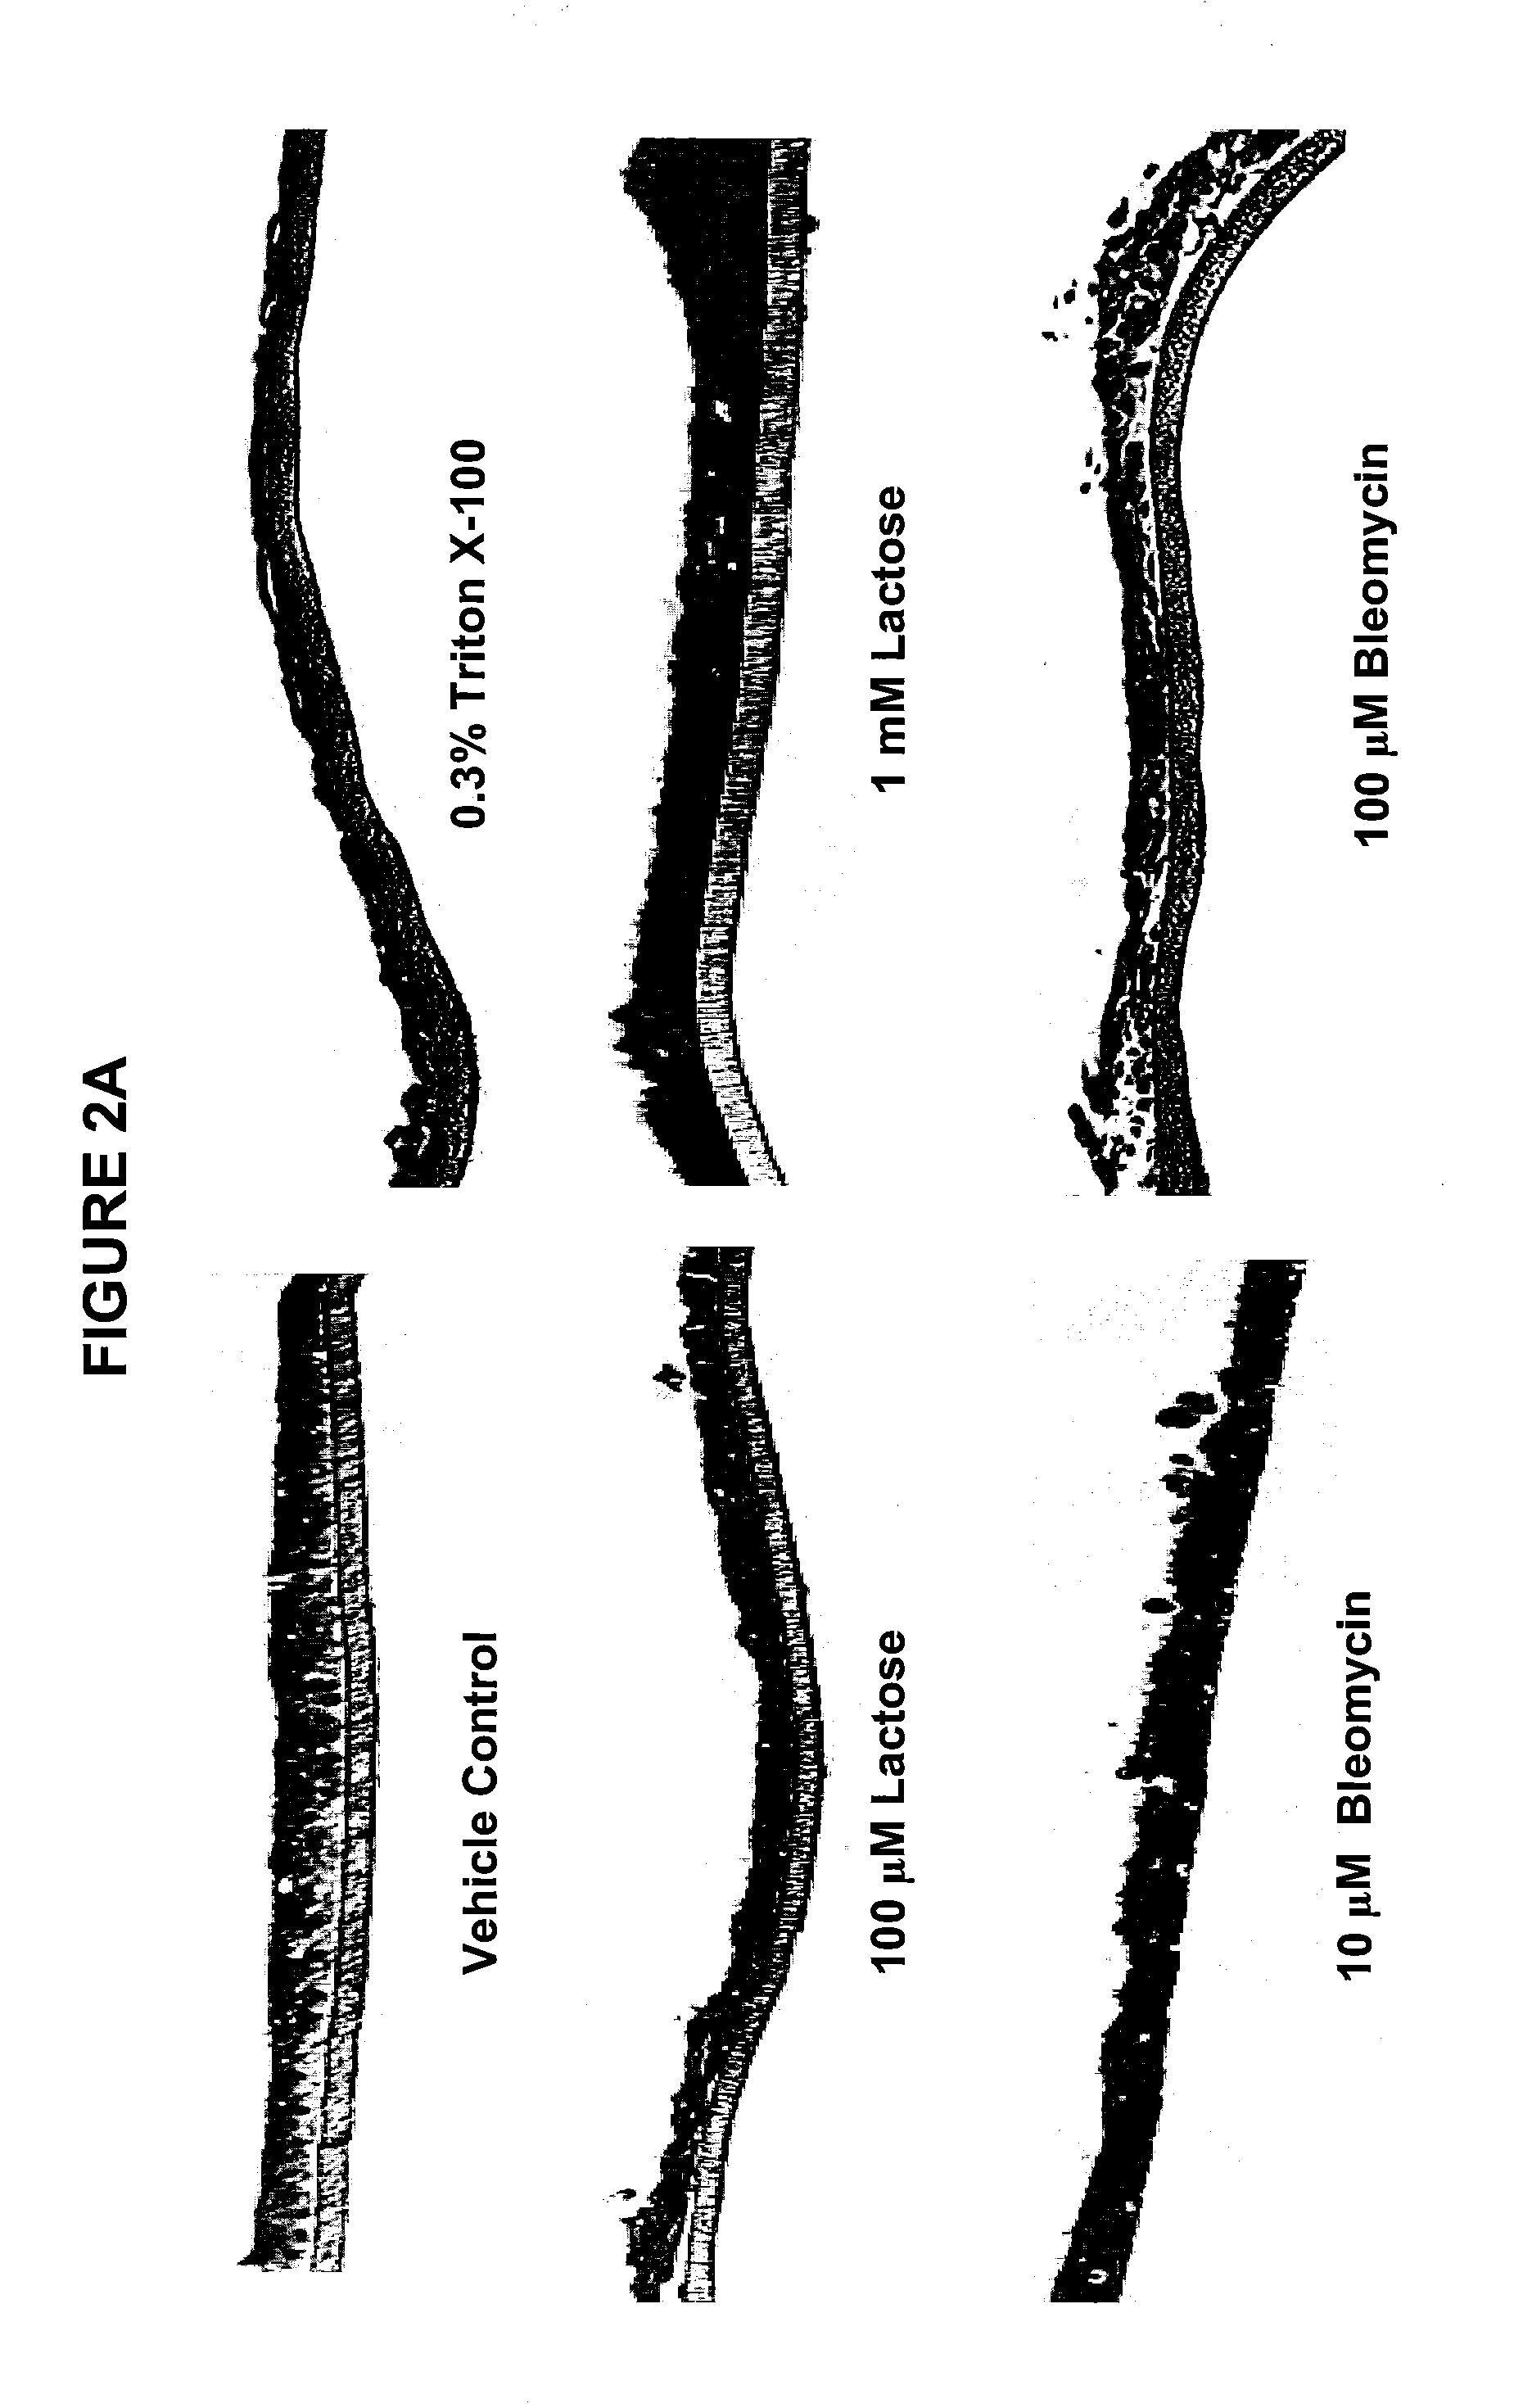 Method for Predicting Respiratory Toxicity of Compounds